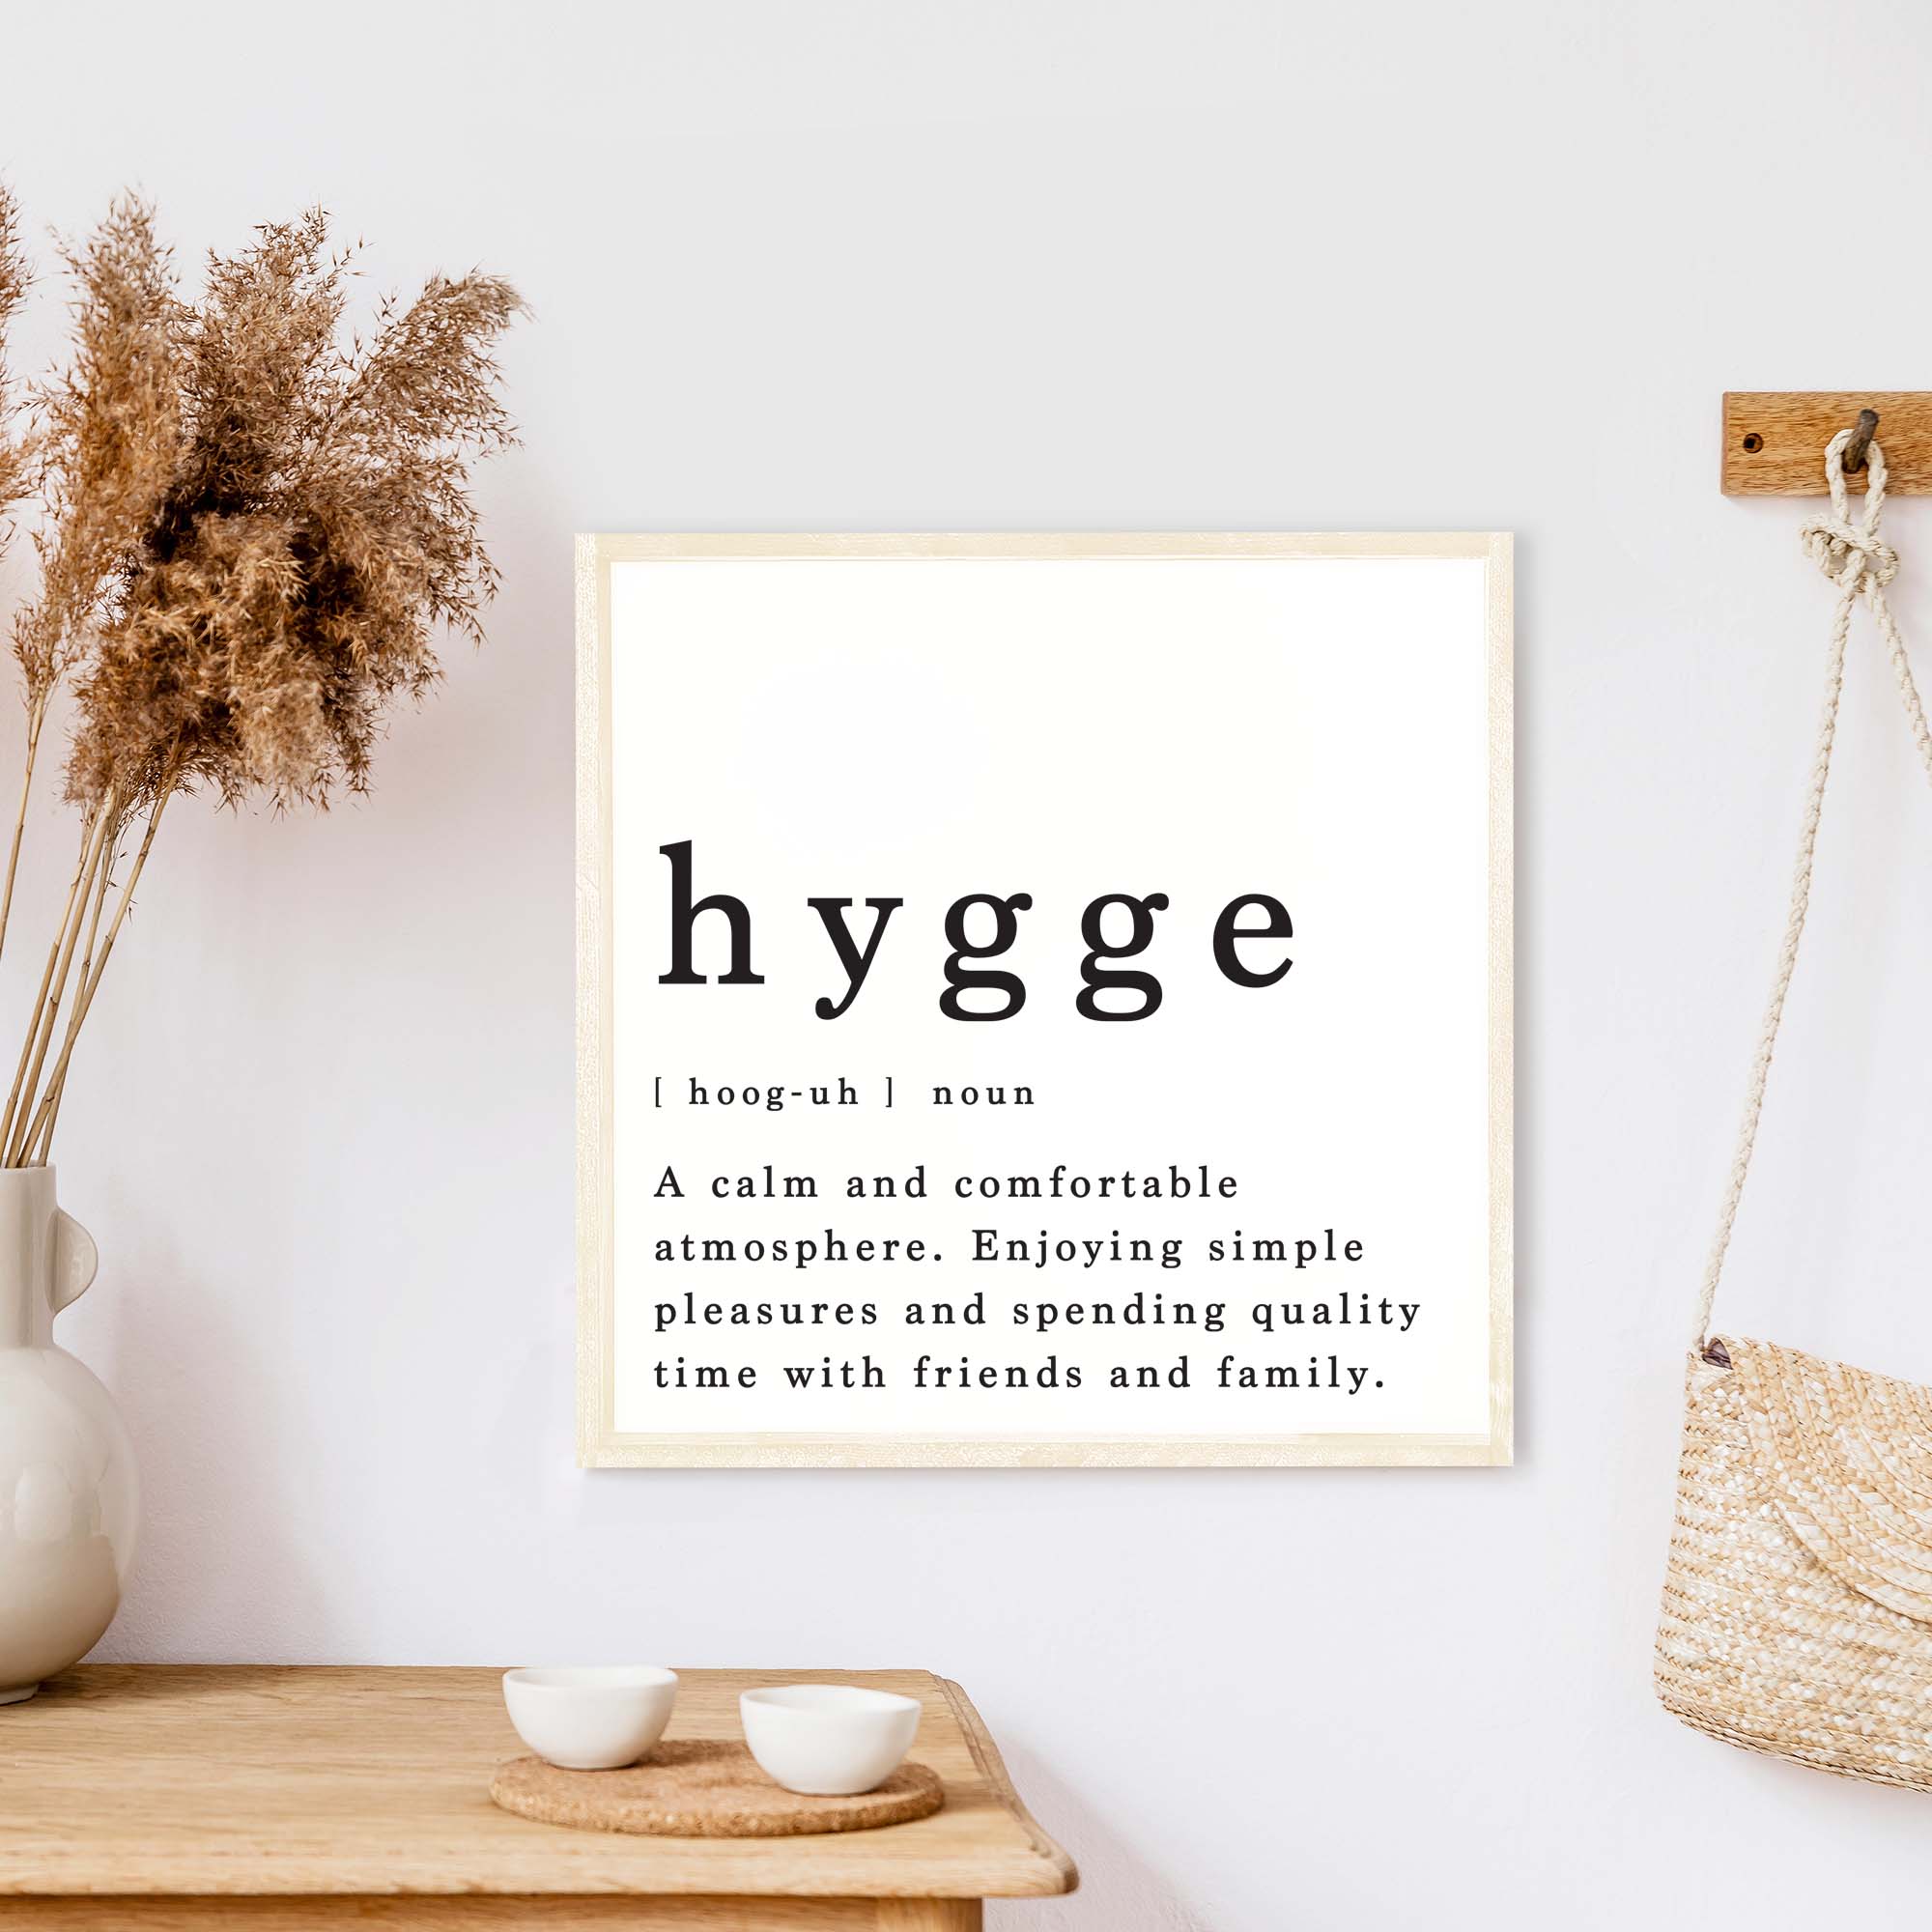 hygge definition wood sign